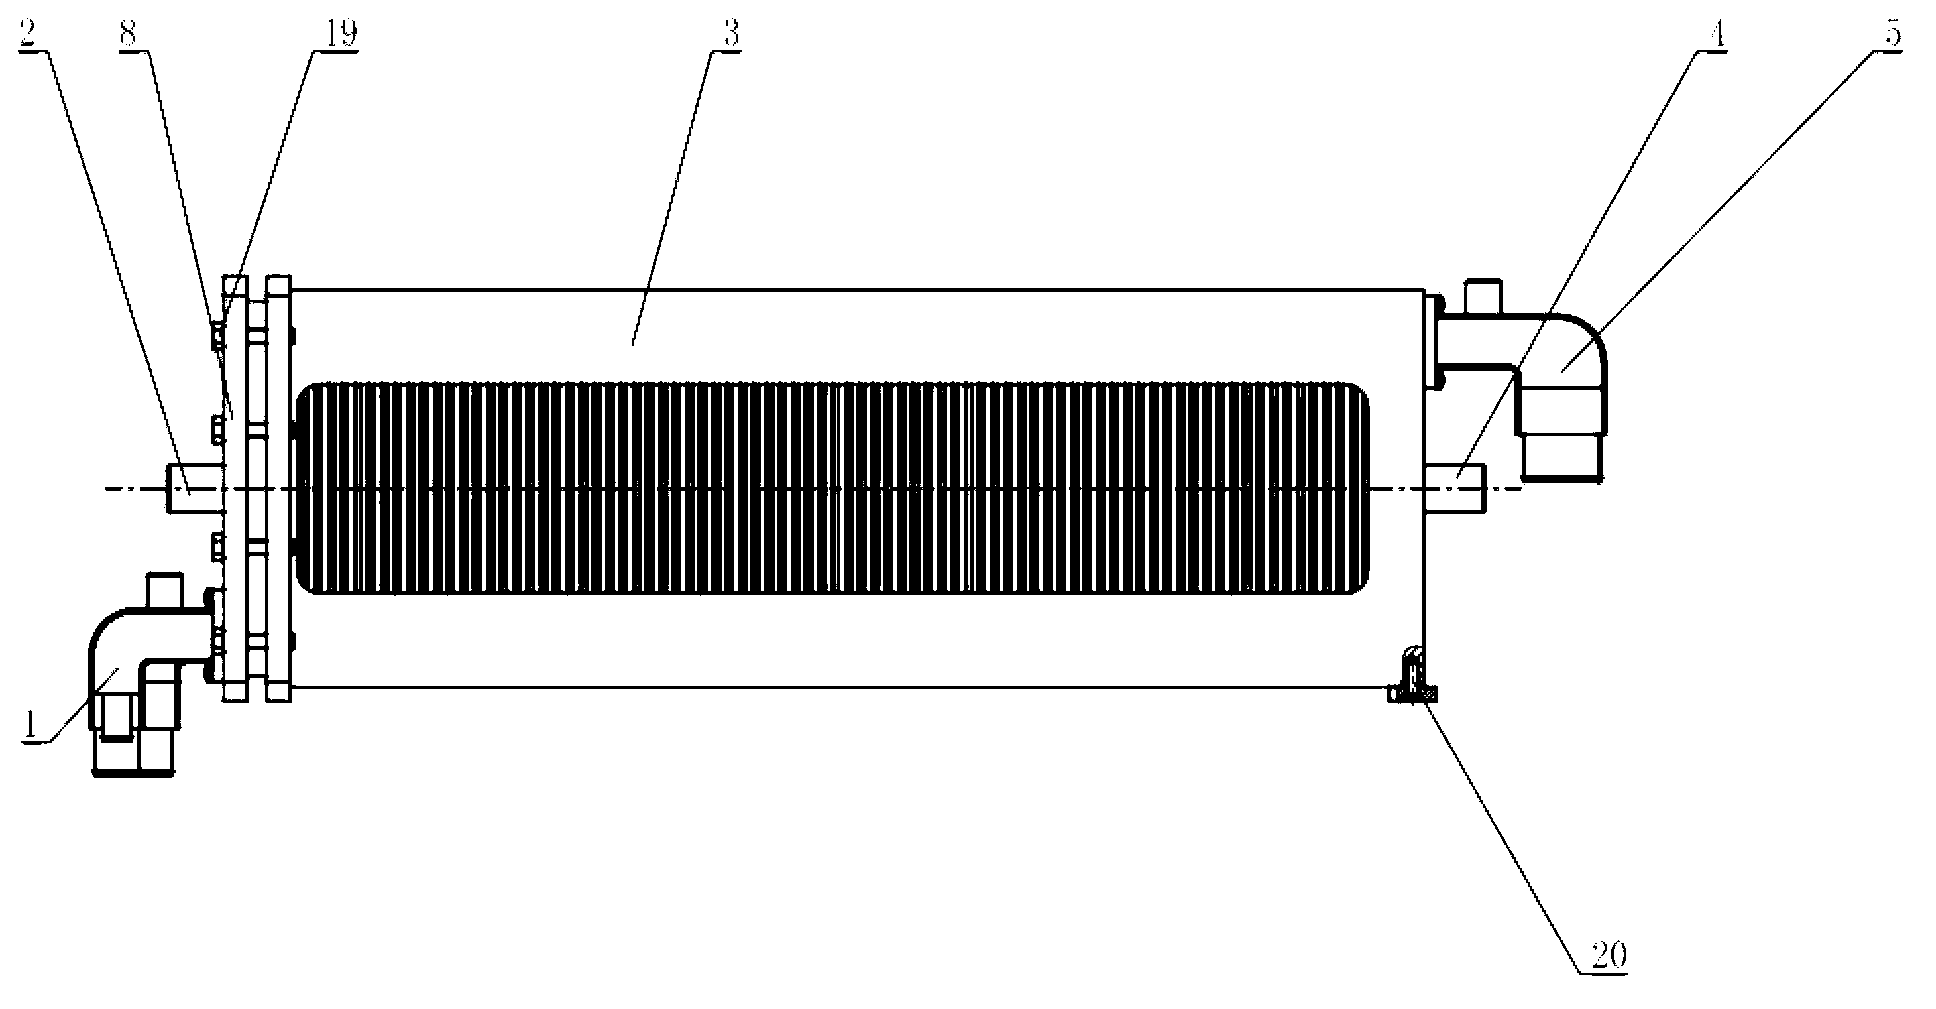 Water-cooled seal fuel cell stack